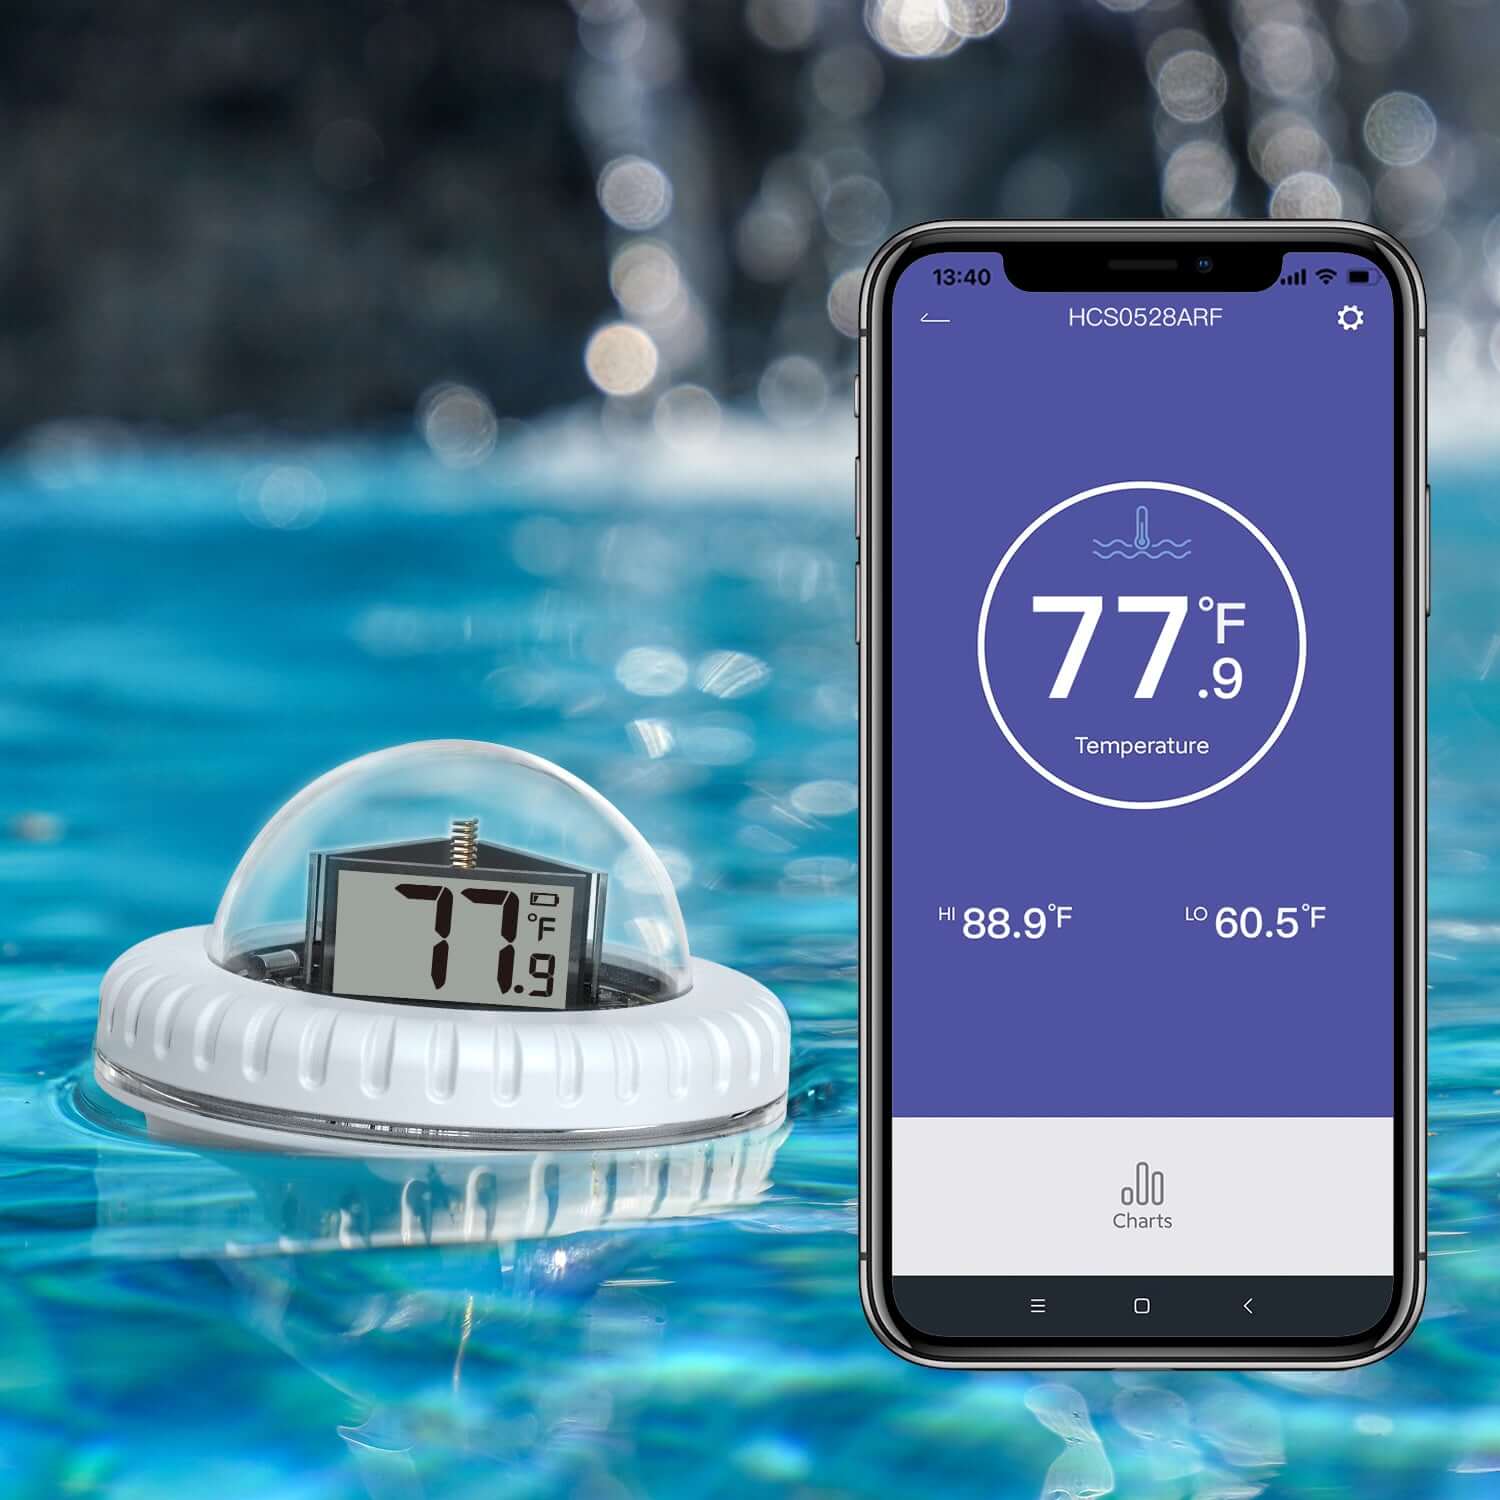  Throws it into the water, you can track the water temperature at any time through the displays or phone APP, precise control.